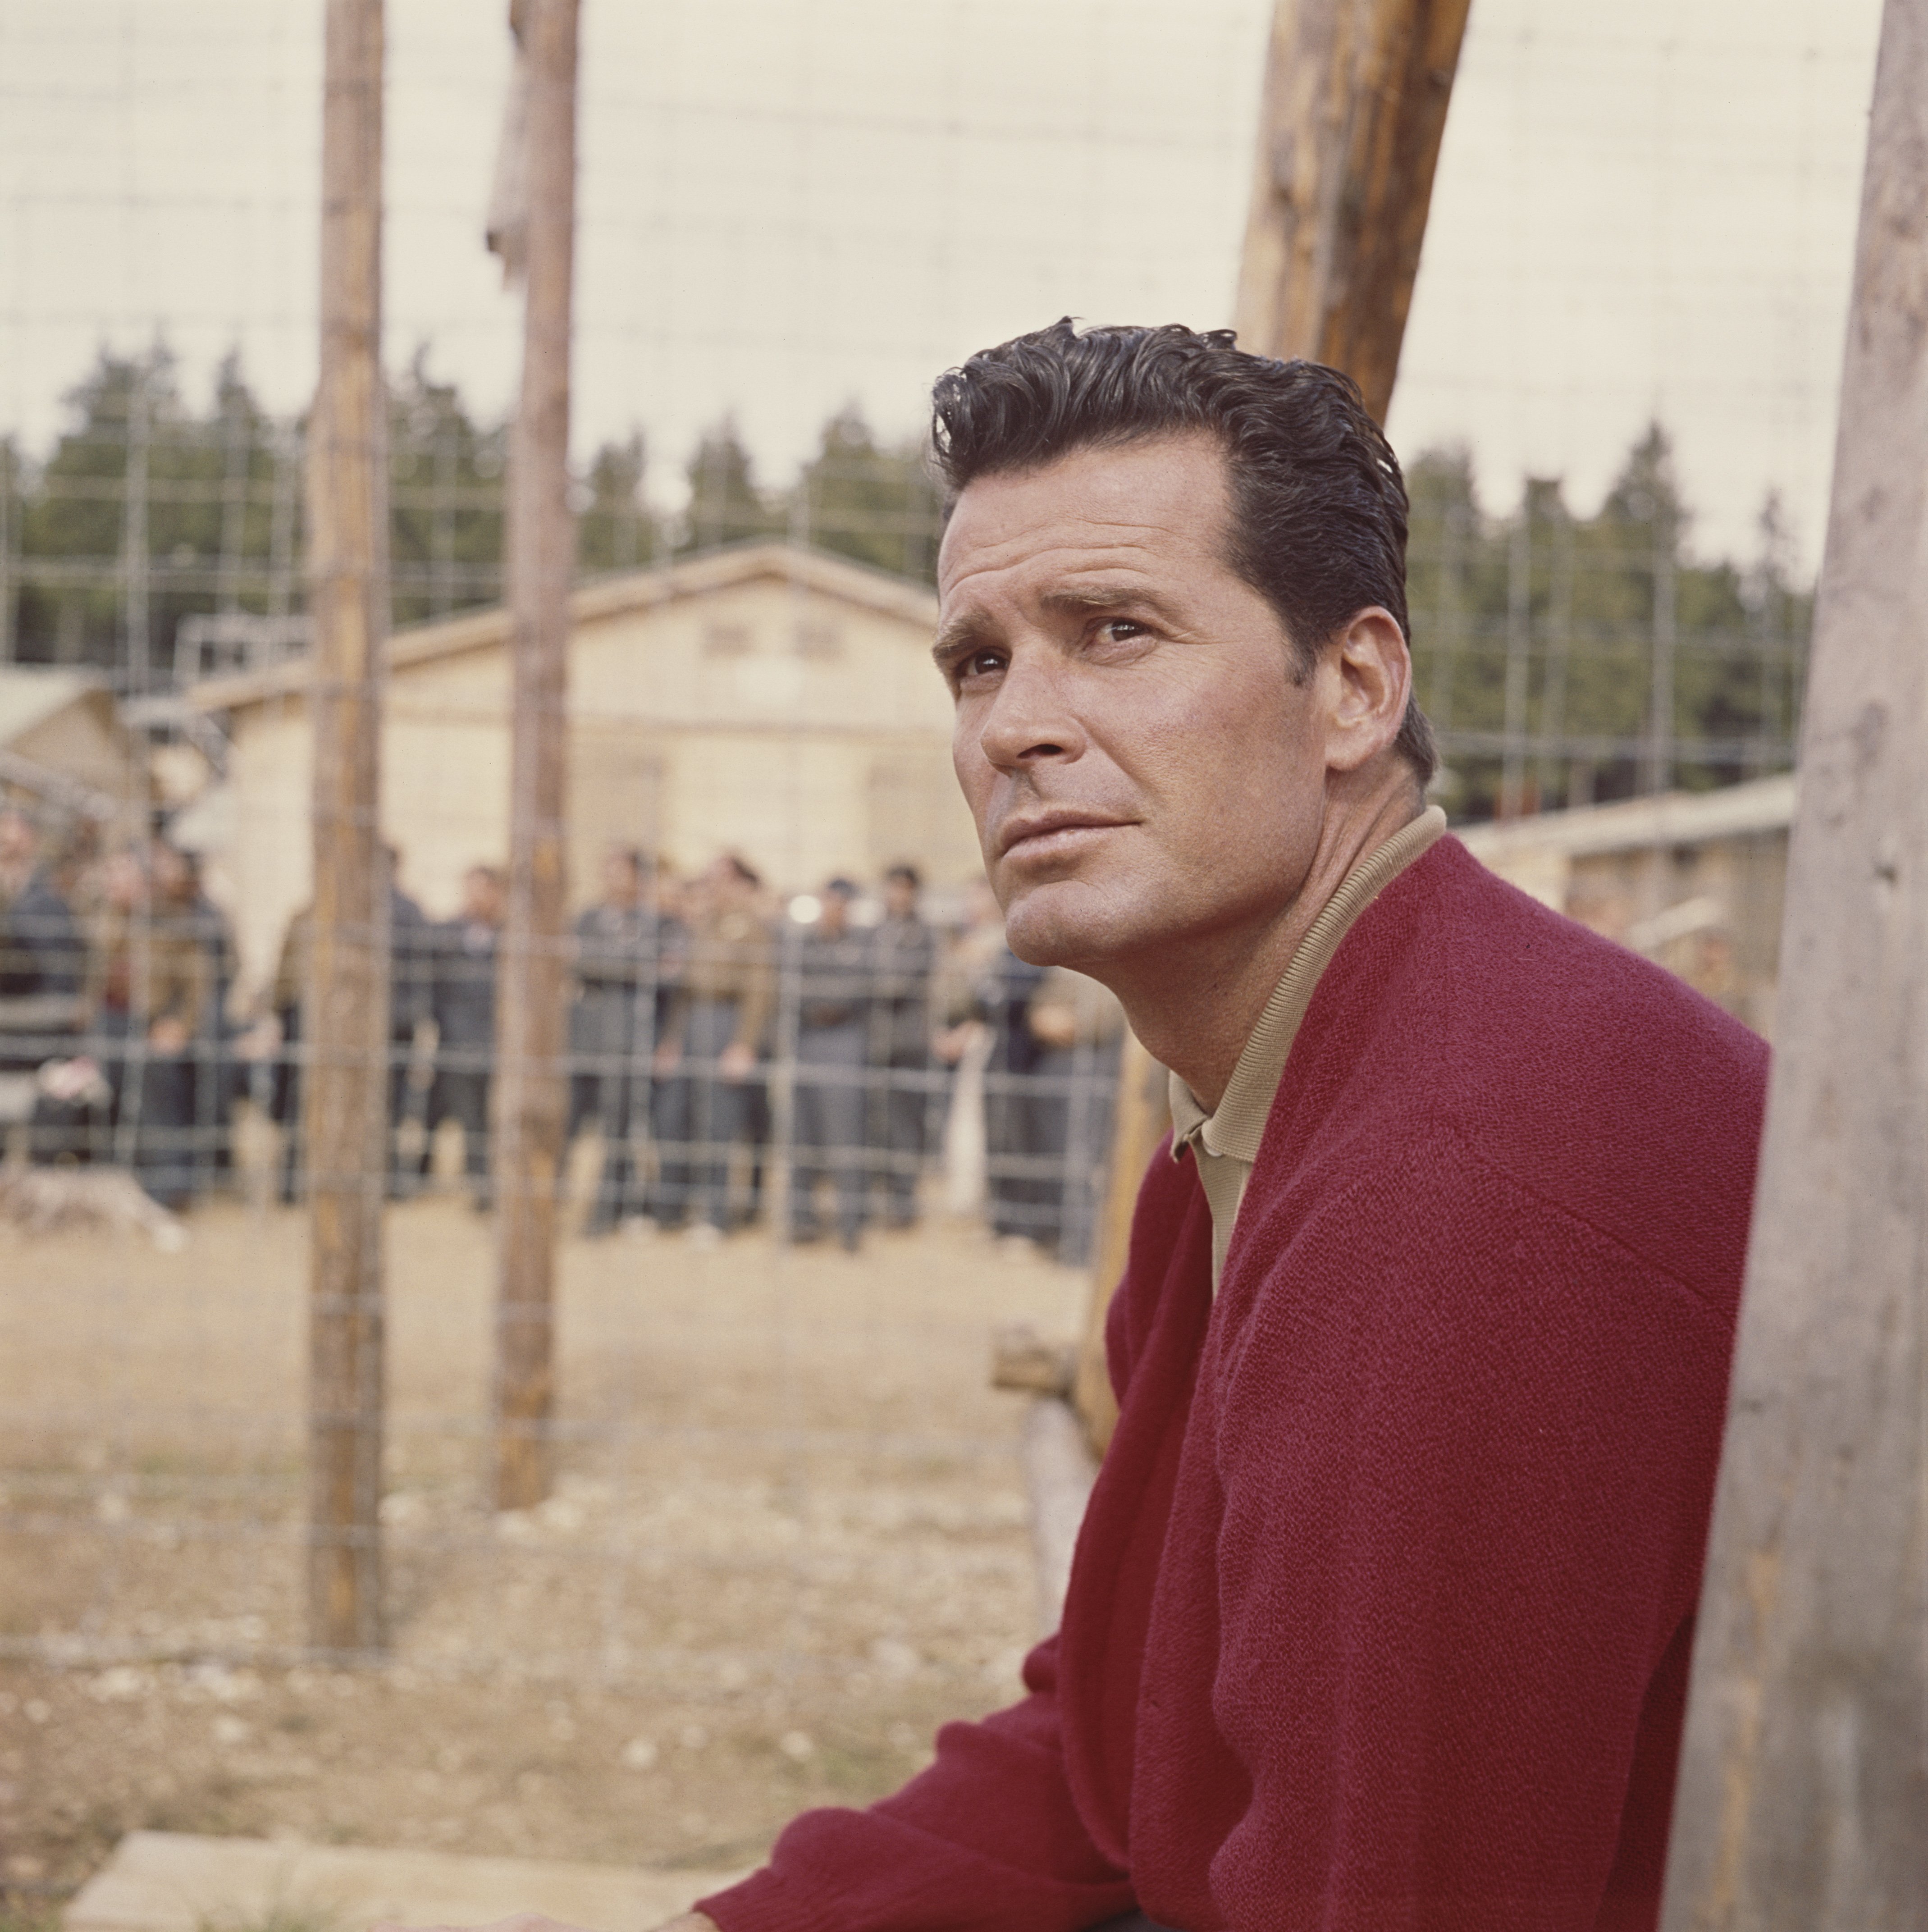 James Garner pictured on the set of the film "The Great Escape" in 1962 in Germany | Source: Getty Images